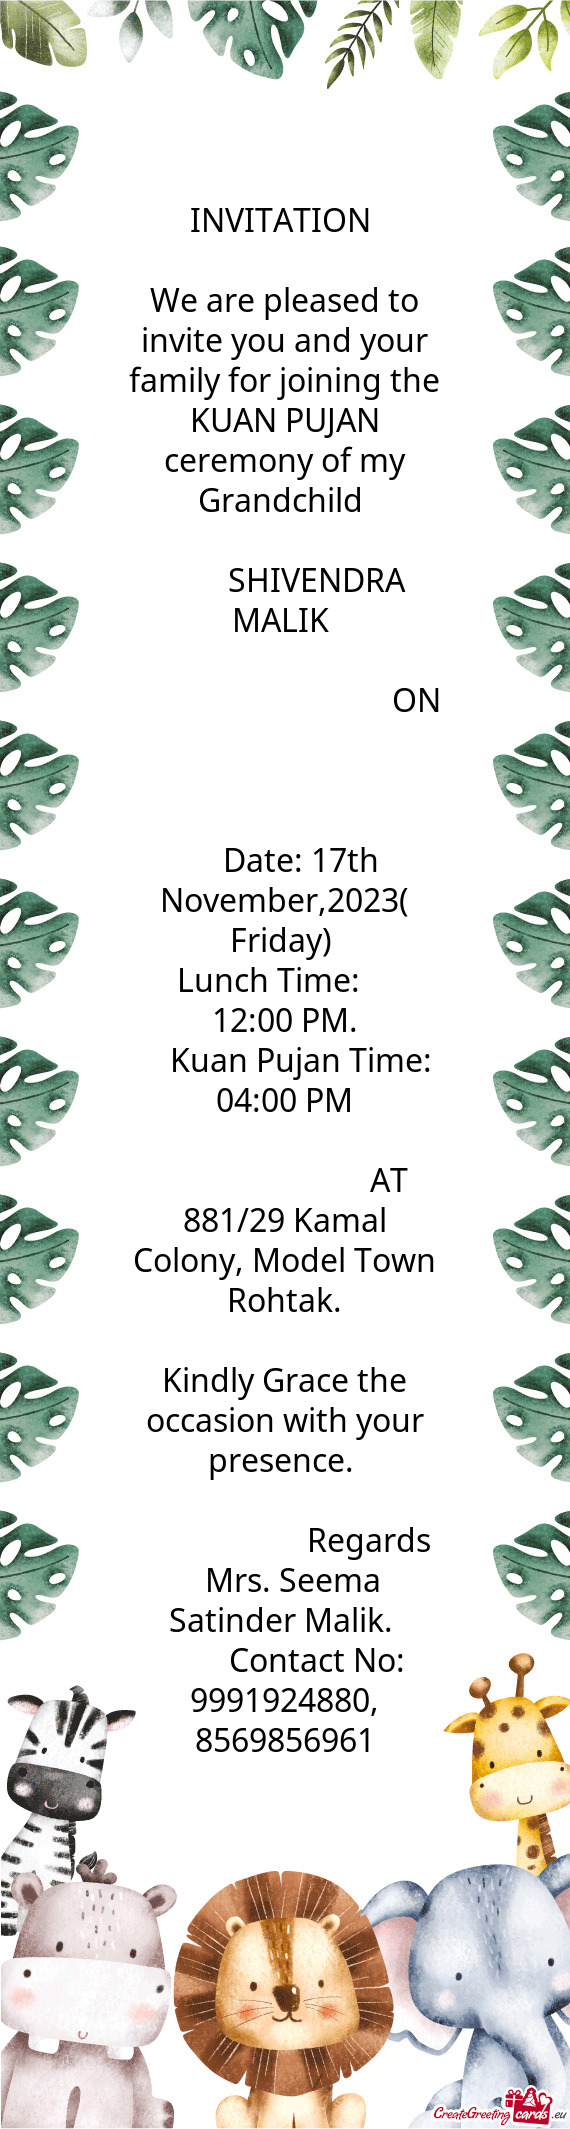 We are pleased to invite you and your family for joining the KUAN PUJAN ceremony of my Grandchild